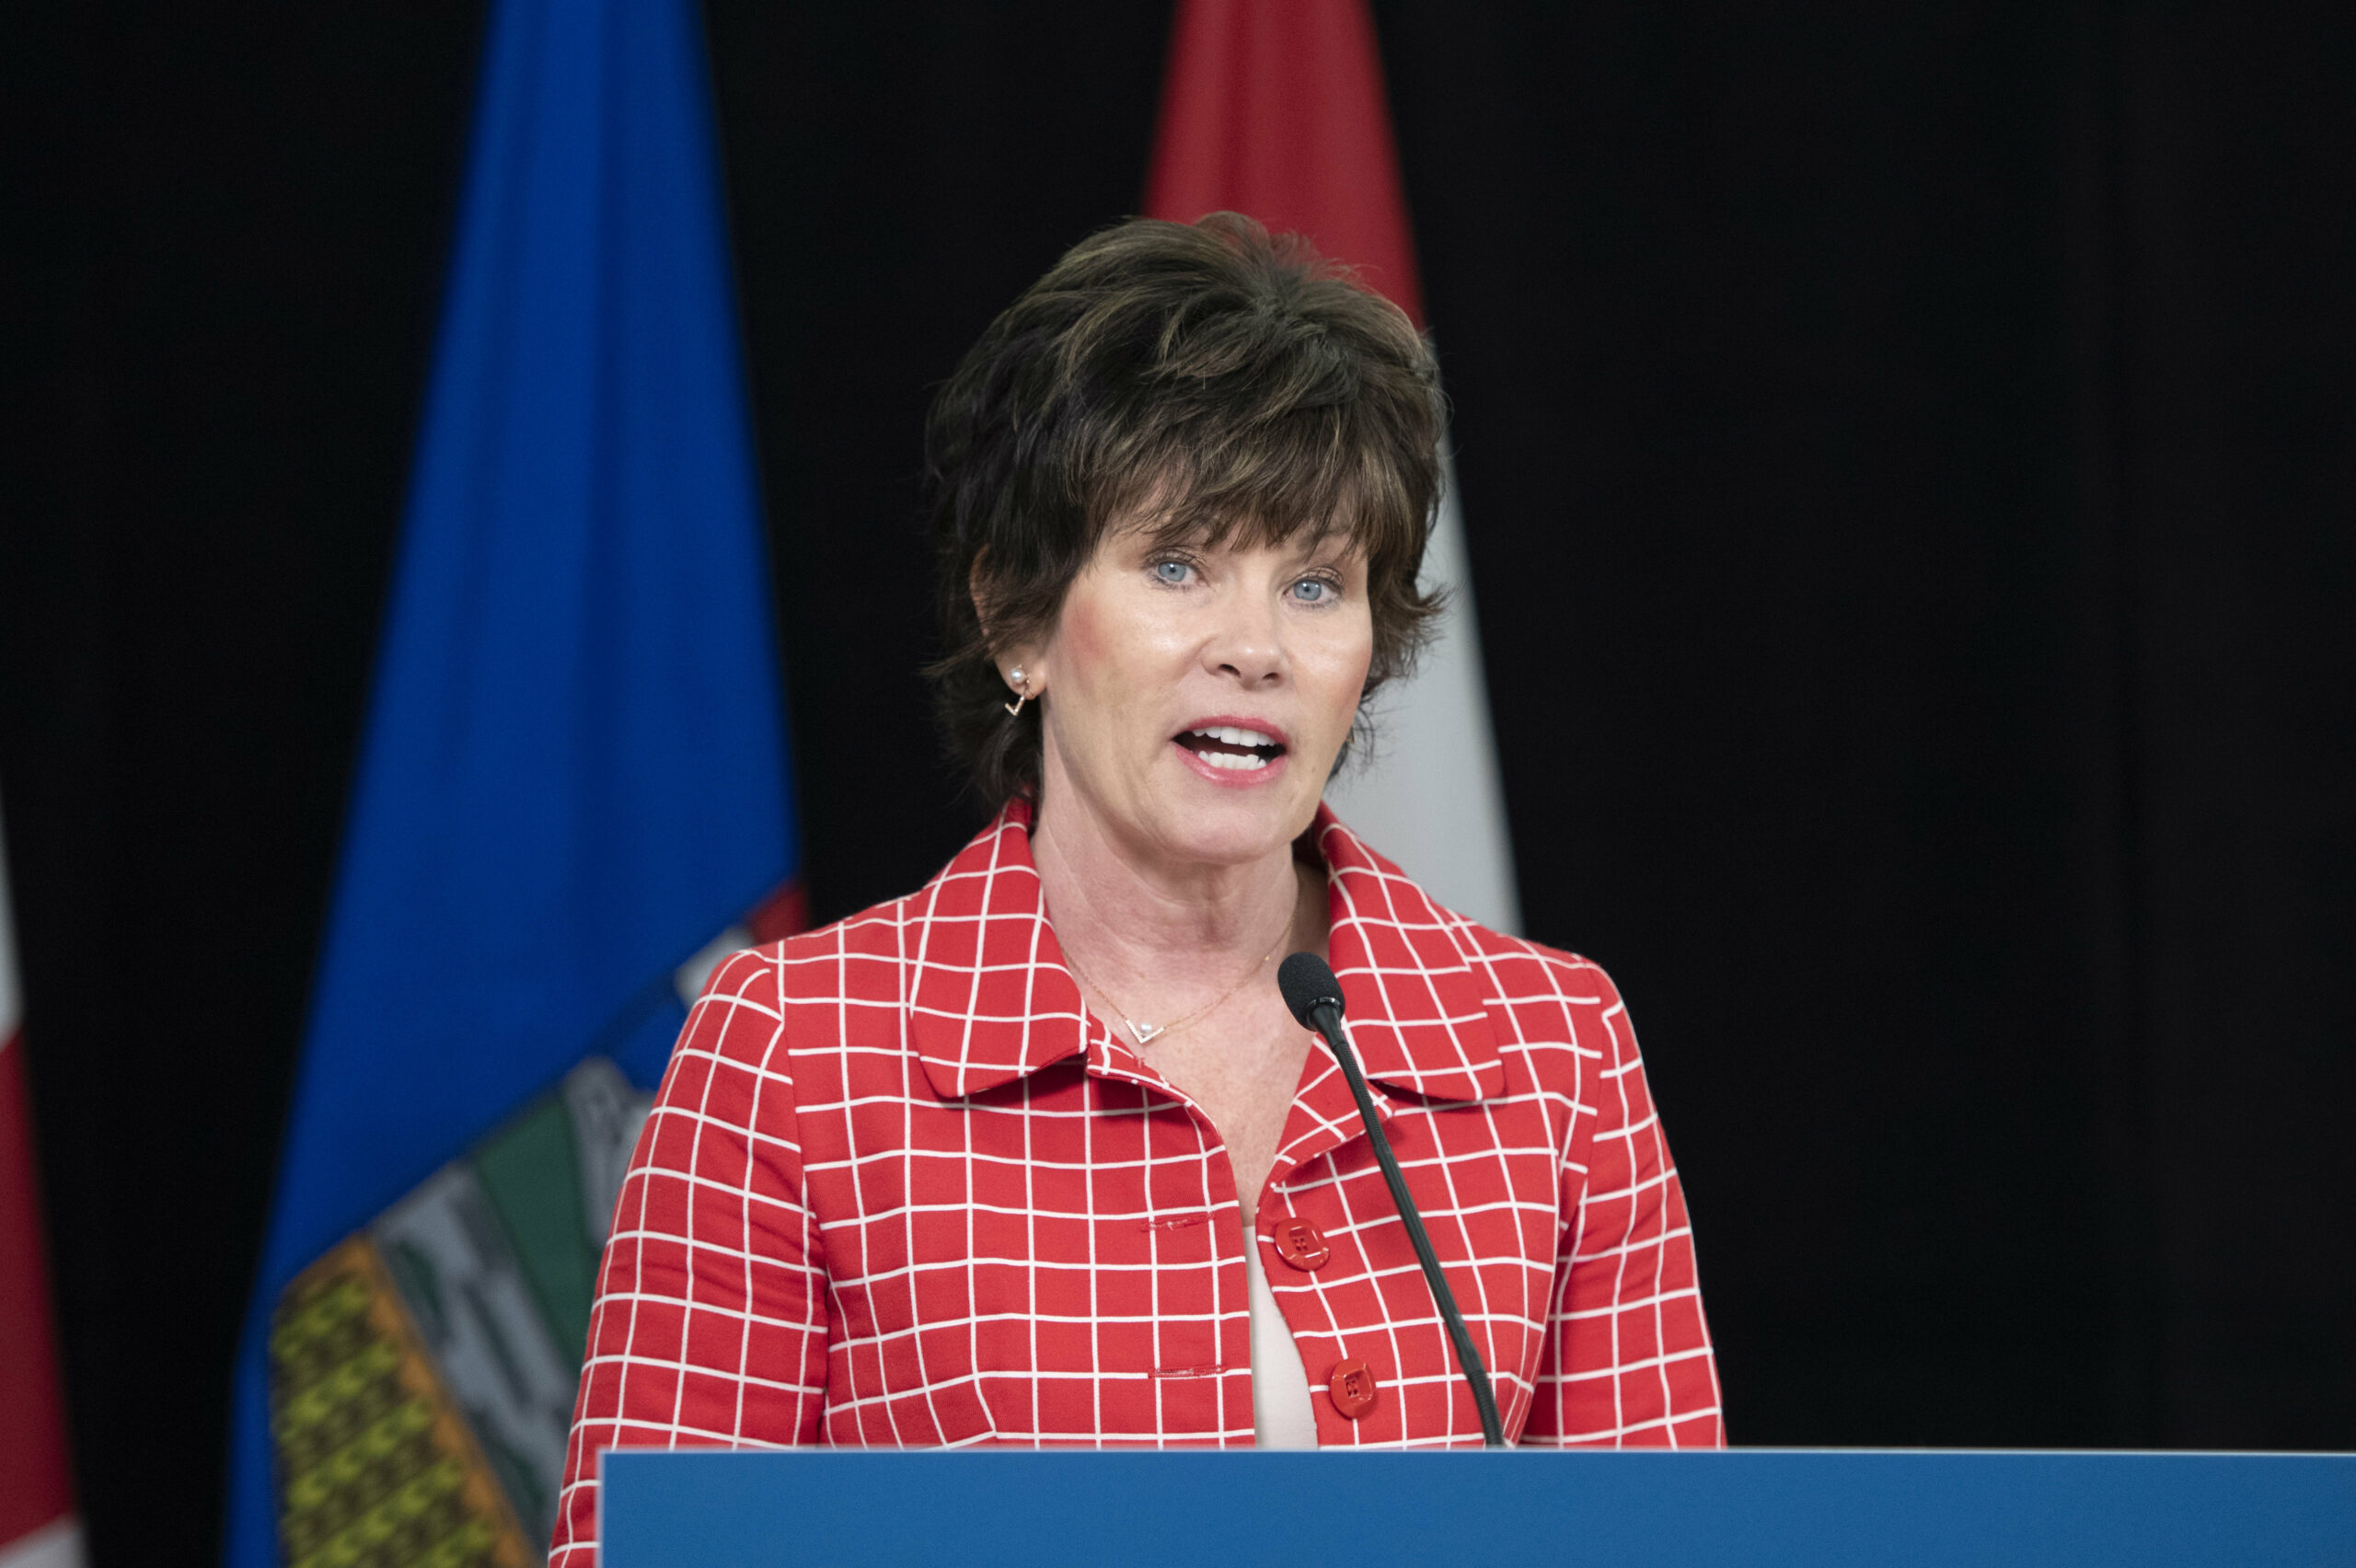 A ban on new coal mines in Alberta's Rockies was announced by Energy Minister Sonya Savage